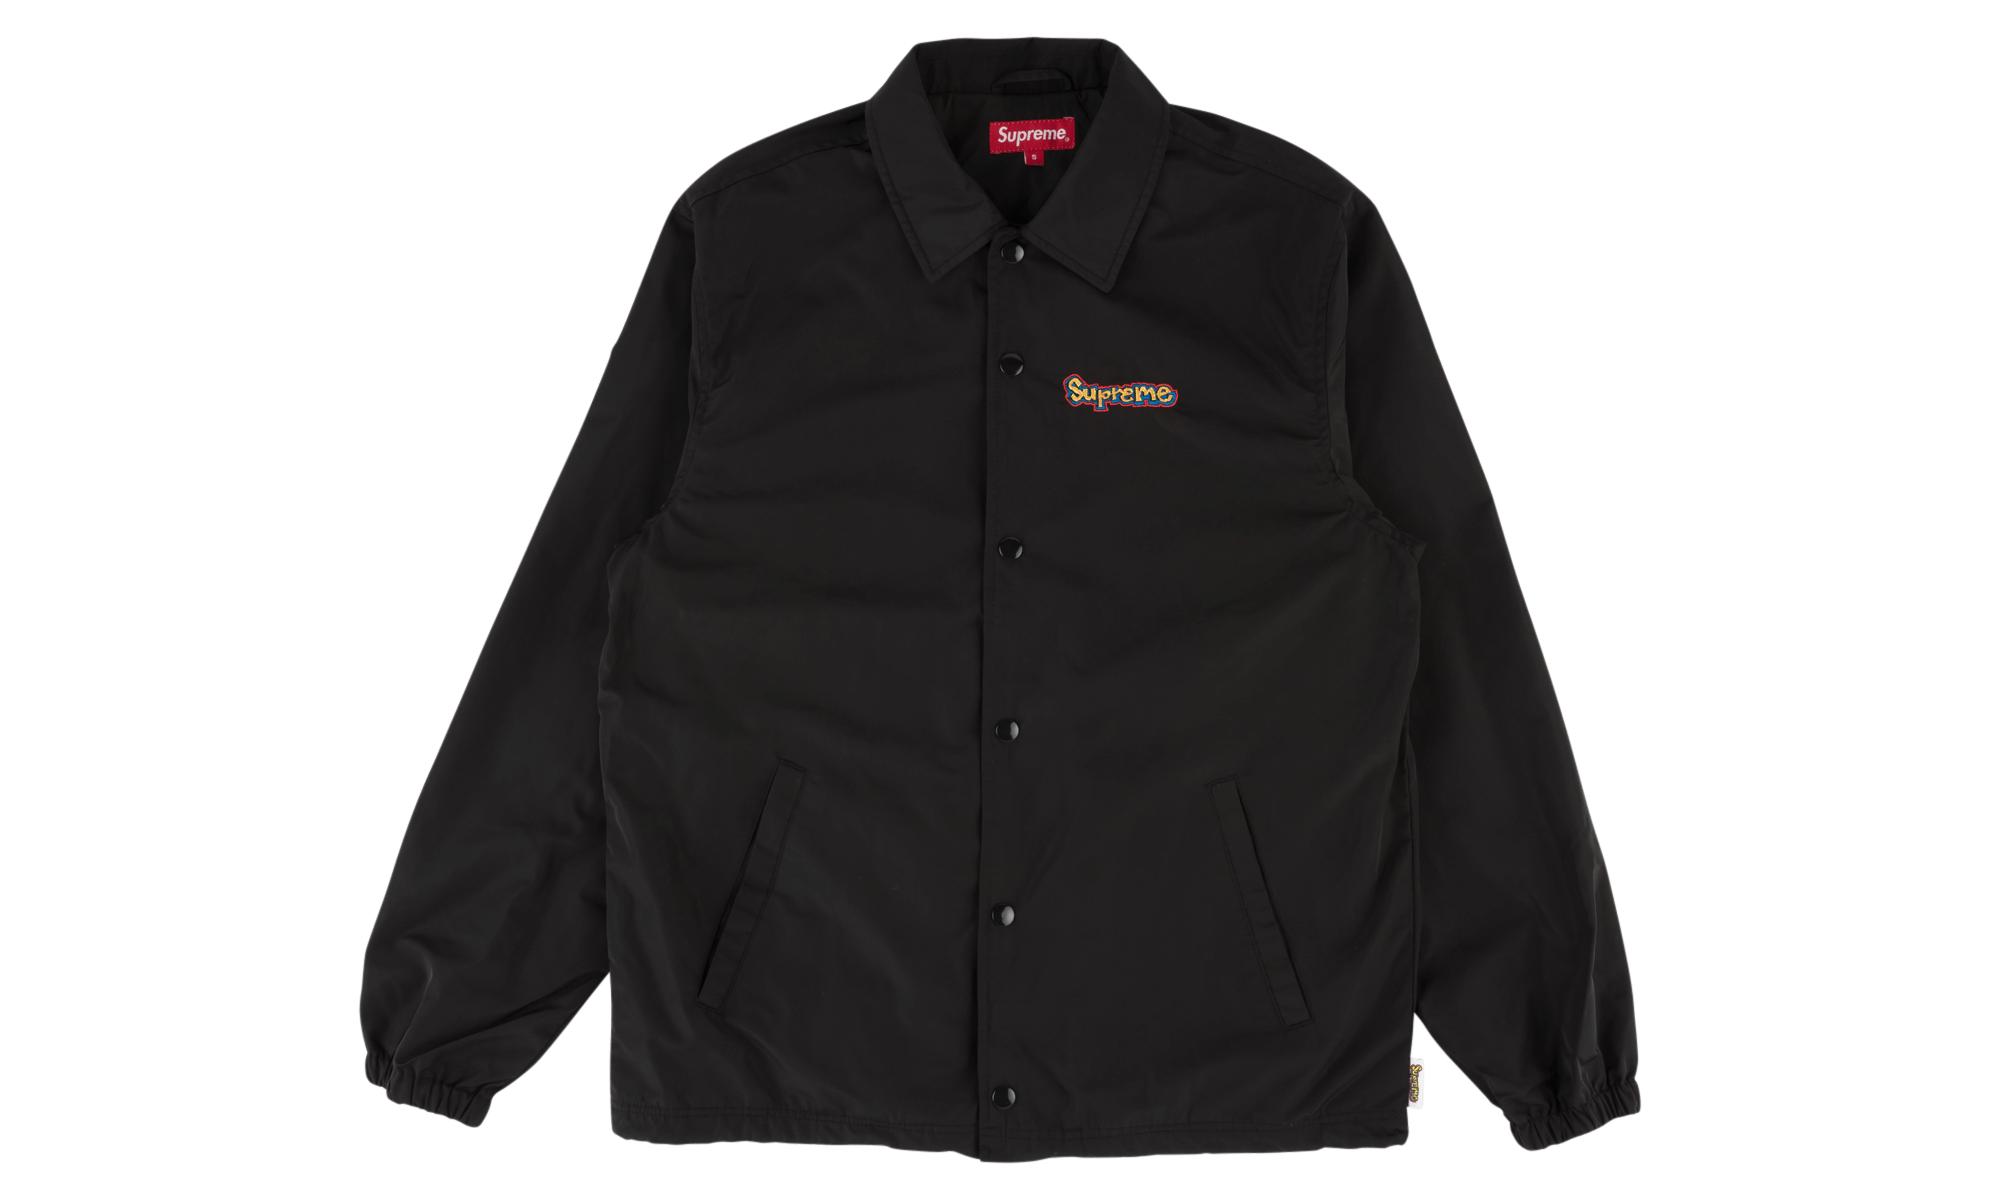 Gonz Logo Coaches Jacket on Sale, UP TO 59% OFF | www.bel-cashmere.com